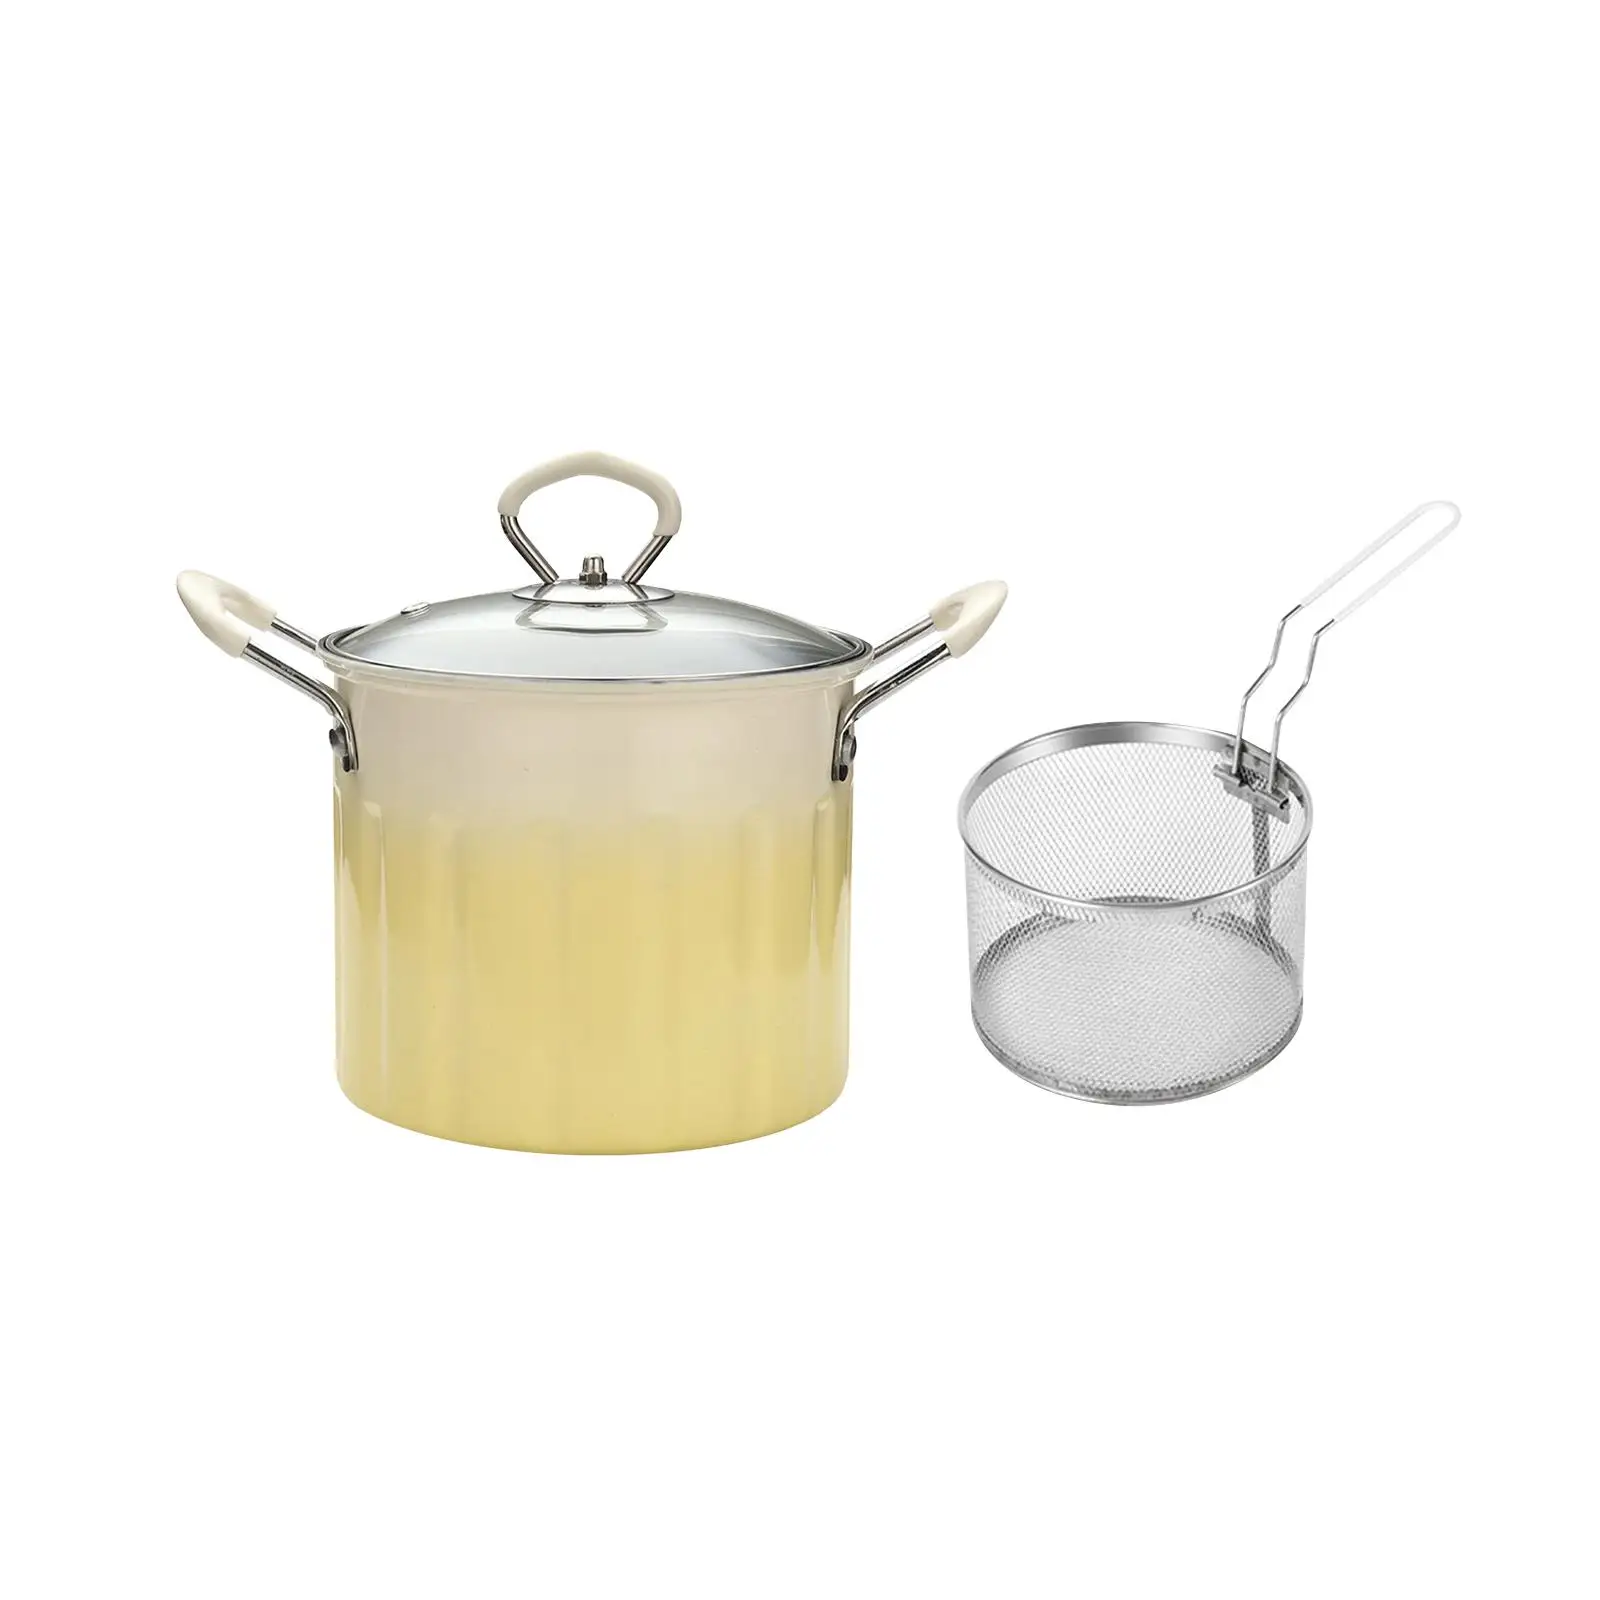 Deep Fryer Pot 3L Kitchen with Basket Japanese Tempura Frying Pot Kitchen Frying Pan for Camping Party Restaurant Cooking Chips